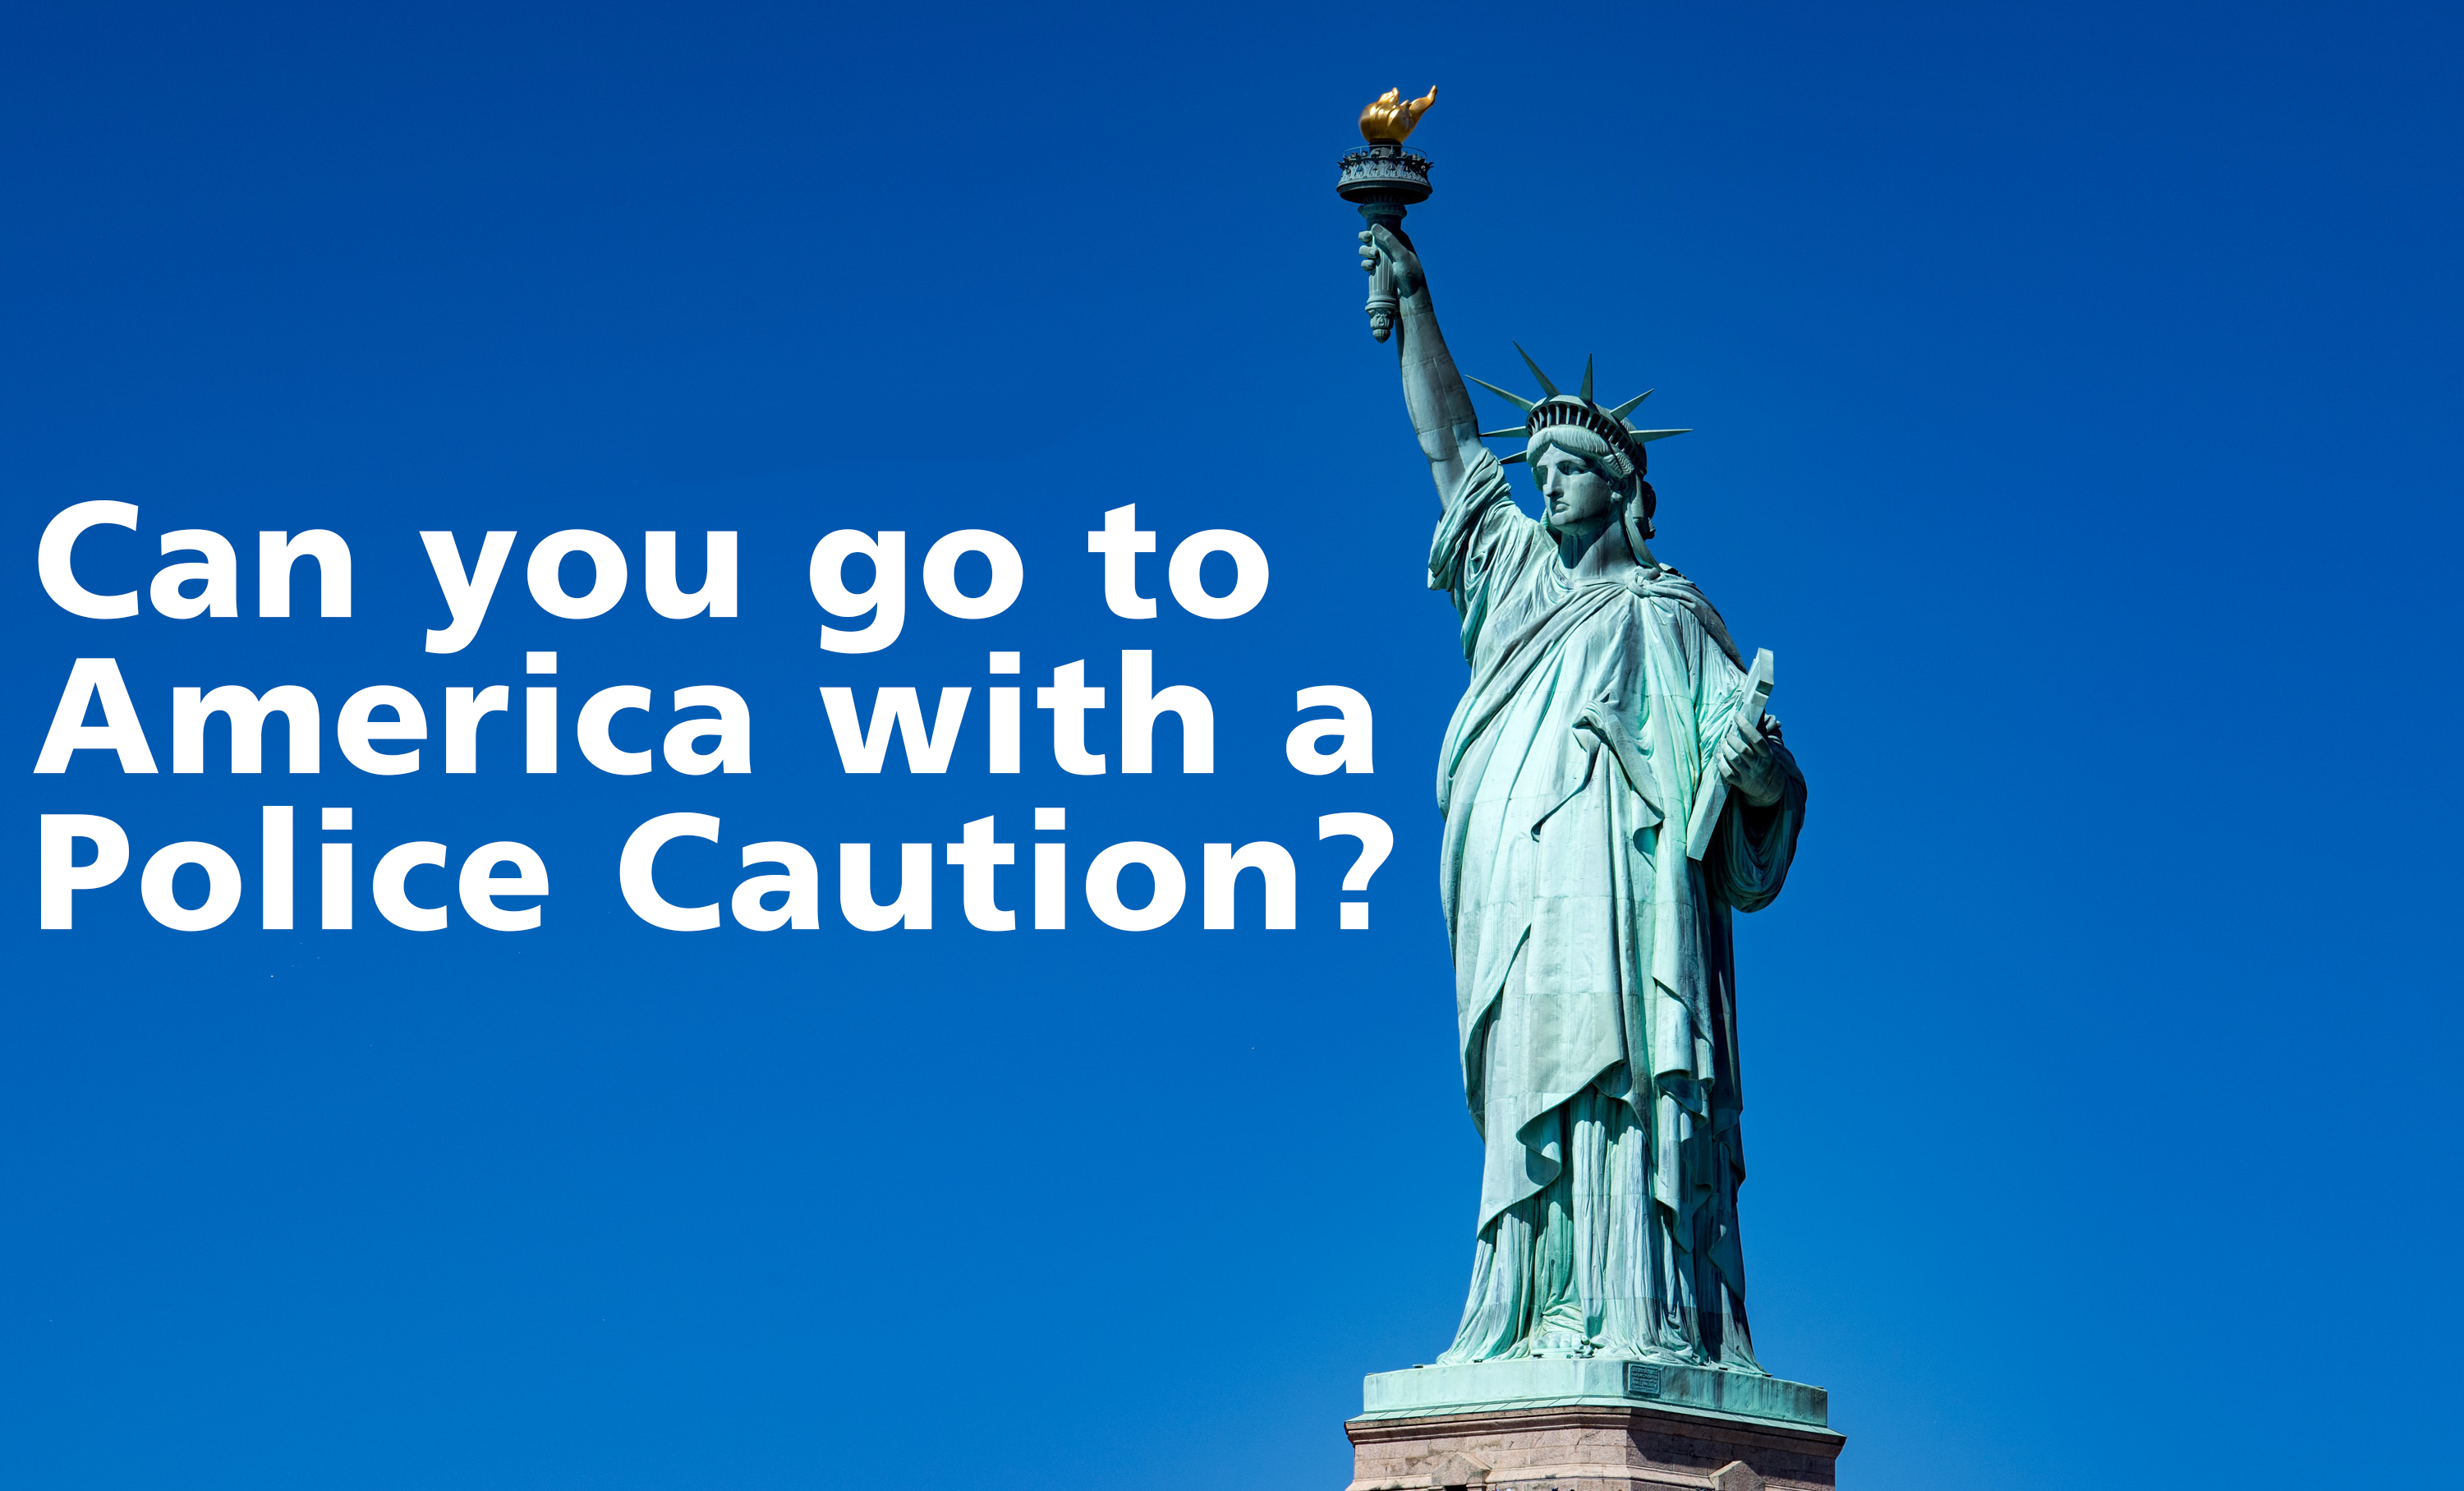 Can you go to America with a police caution?